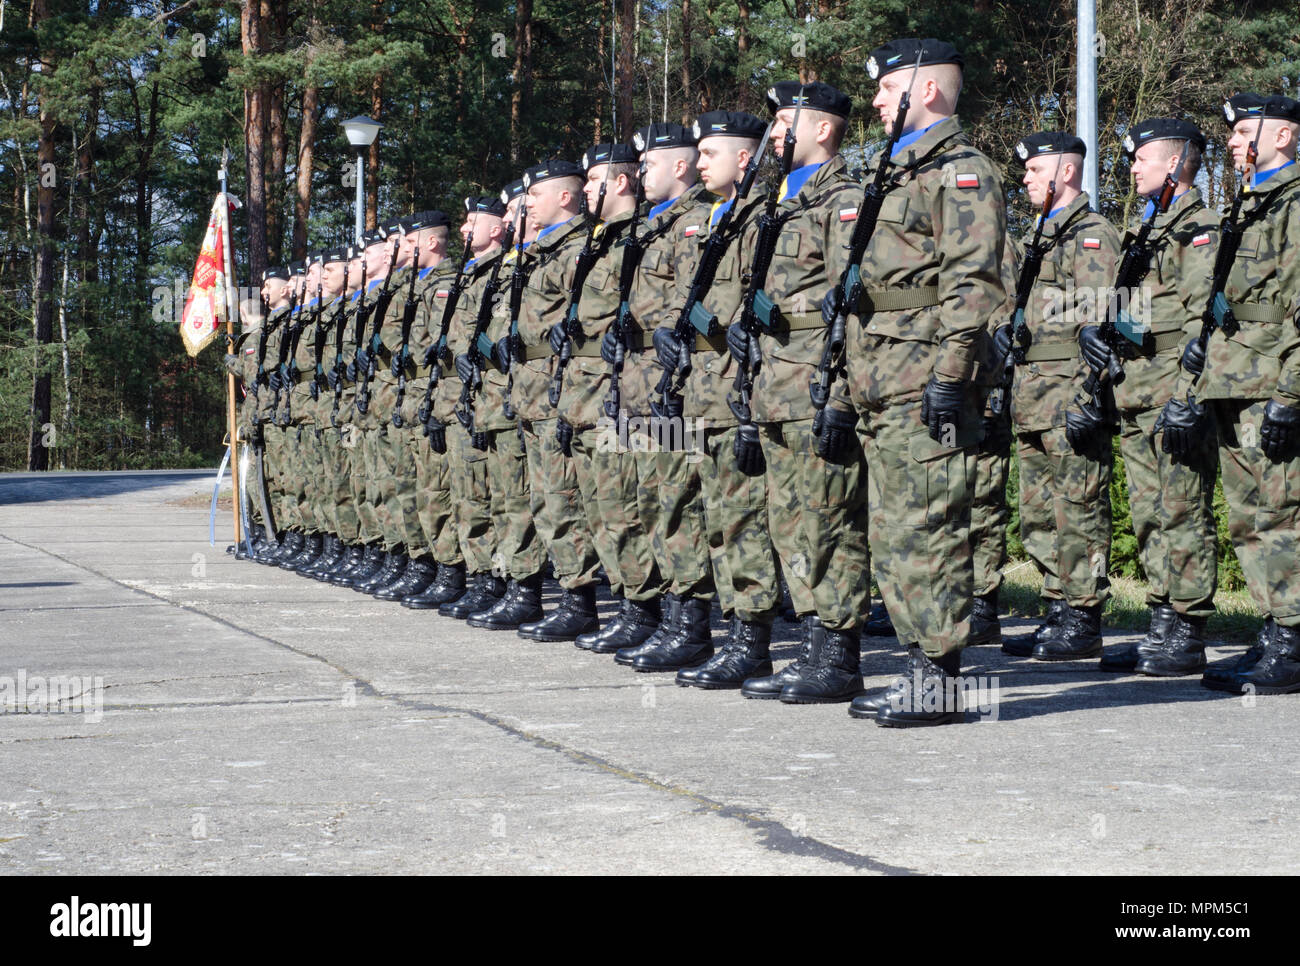 Polish soldiers stand in formation during the commemoration ceremony honoring the 73rd anniversary of the Great Escape from Stalag Luft III POW camp March 24, 2017 at Zagan, Poland.  The ceremony honored the men from 14 nations that were held as POWs at the camp. Members of 3rd ABCT, 4th ID participated in the two-day event to strengthen their relationships with their Polish allies while participating in Operation Atlantic Resolve. (U.S. Army photo by Capt. John W. Strickland, 7th Mobile Public Affairs Detachment) Stock Photo